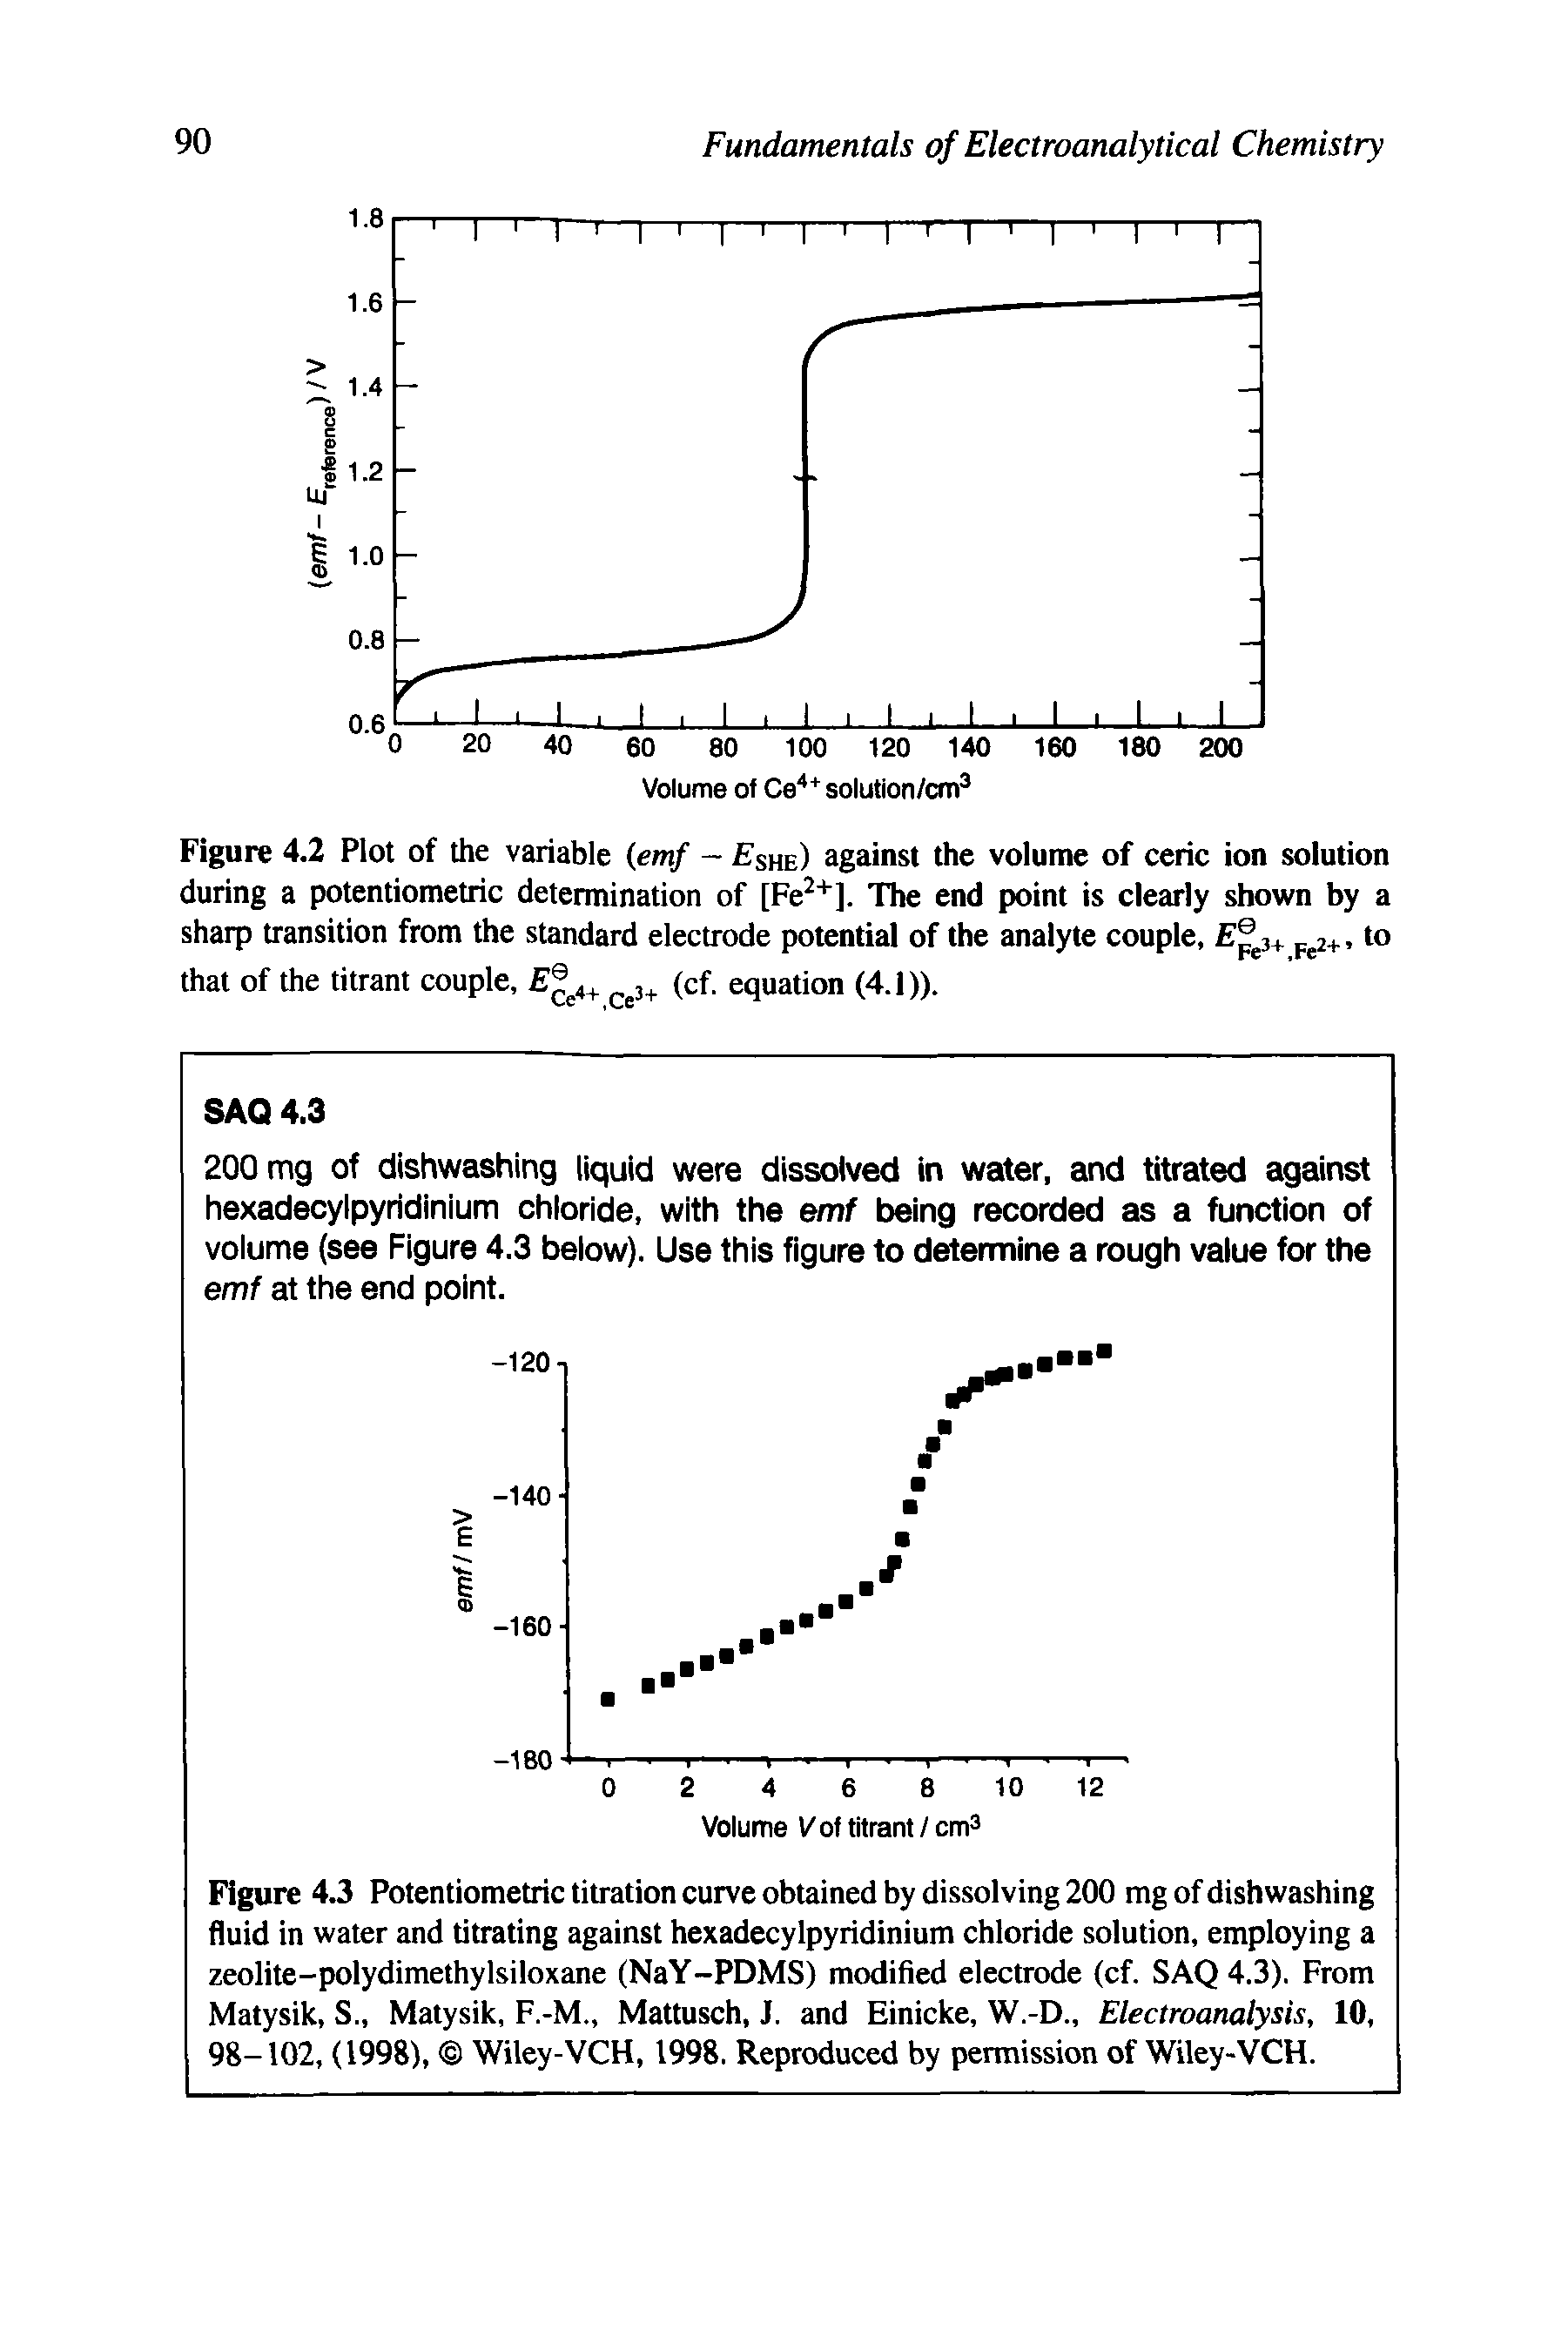 Figure 4.3 Potentiometric titration curve obtained by dissolving 200 mg of dishwashing fluid in water and titrating against hexadecylpyridinium chloride solution, employing a zeolite-polydimethylsiloxane (NaY-PDMS) modified electrode (cf. SAQ 4.3). From Matysik, S Matysik, F.-M., Mattusch, J. and Einicke, W.-D., Electroanalysis, 10, 98-102, (1998), Wiley-VCH, 1998. Reproduced by permission of Wiley-VCH.